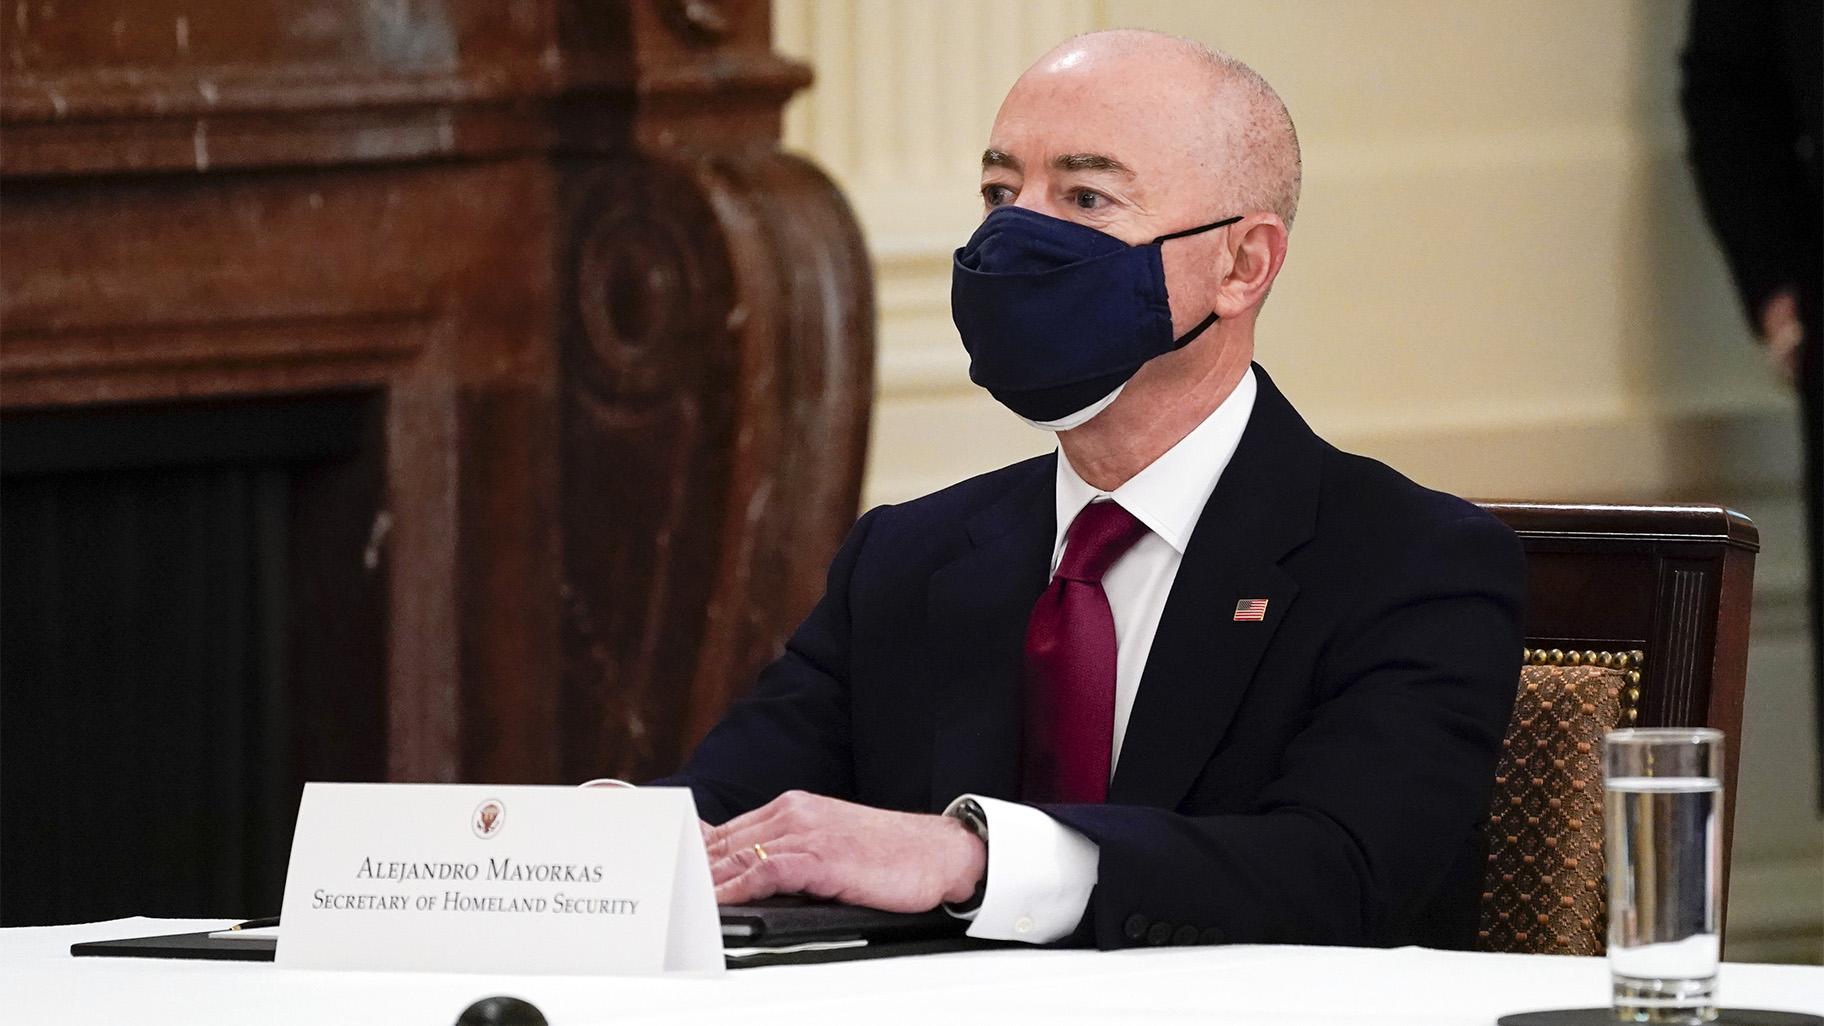 Secretary of Homeland Security Secretary Alejandro Mayorkas attends a Cabinet meeting with President Joe Biden in the East Room of the White House, Thursday, April 1, 2021, in Washington. (AP Photo / Evan Vucci)